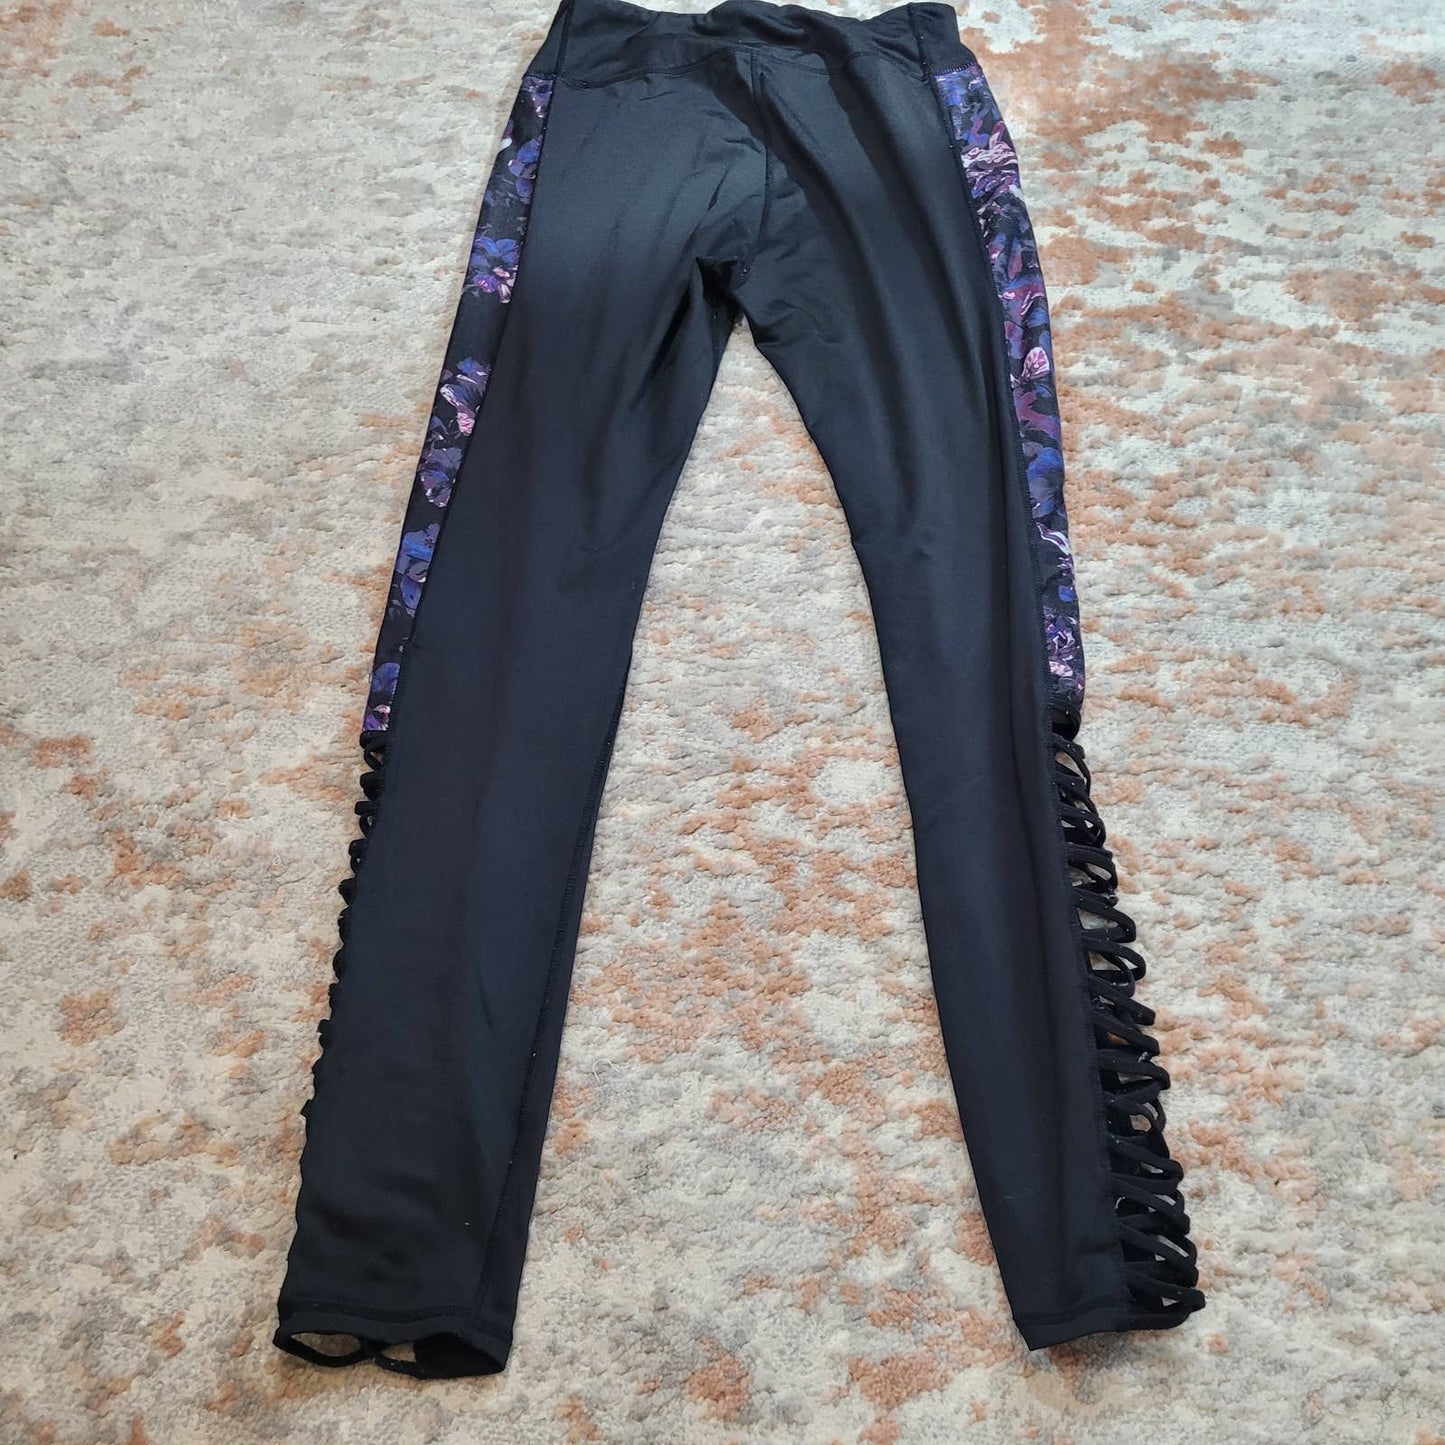 Black Leggings with Floral Side Panels and Strappy Calves - Size Medium